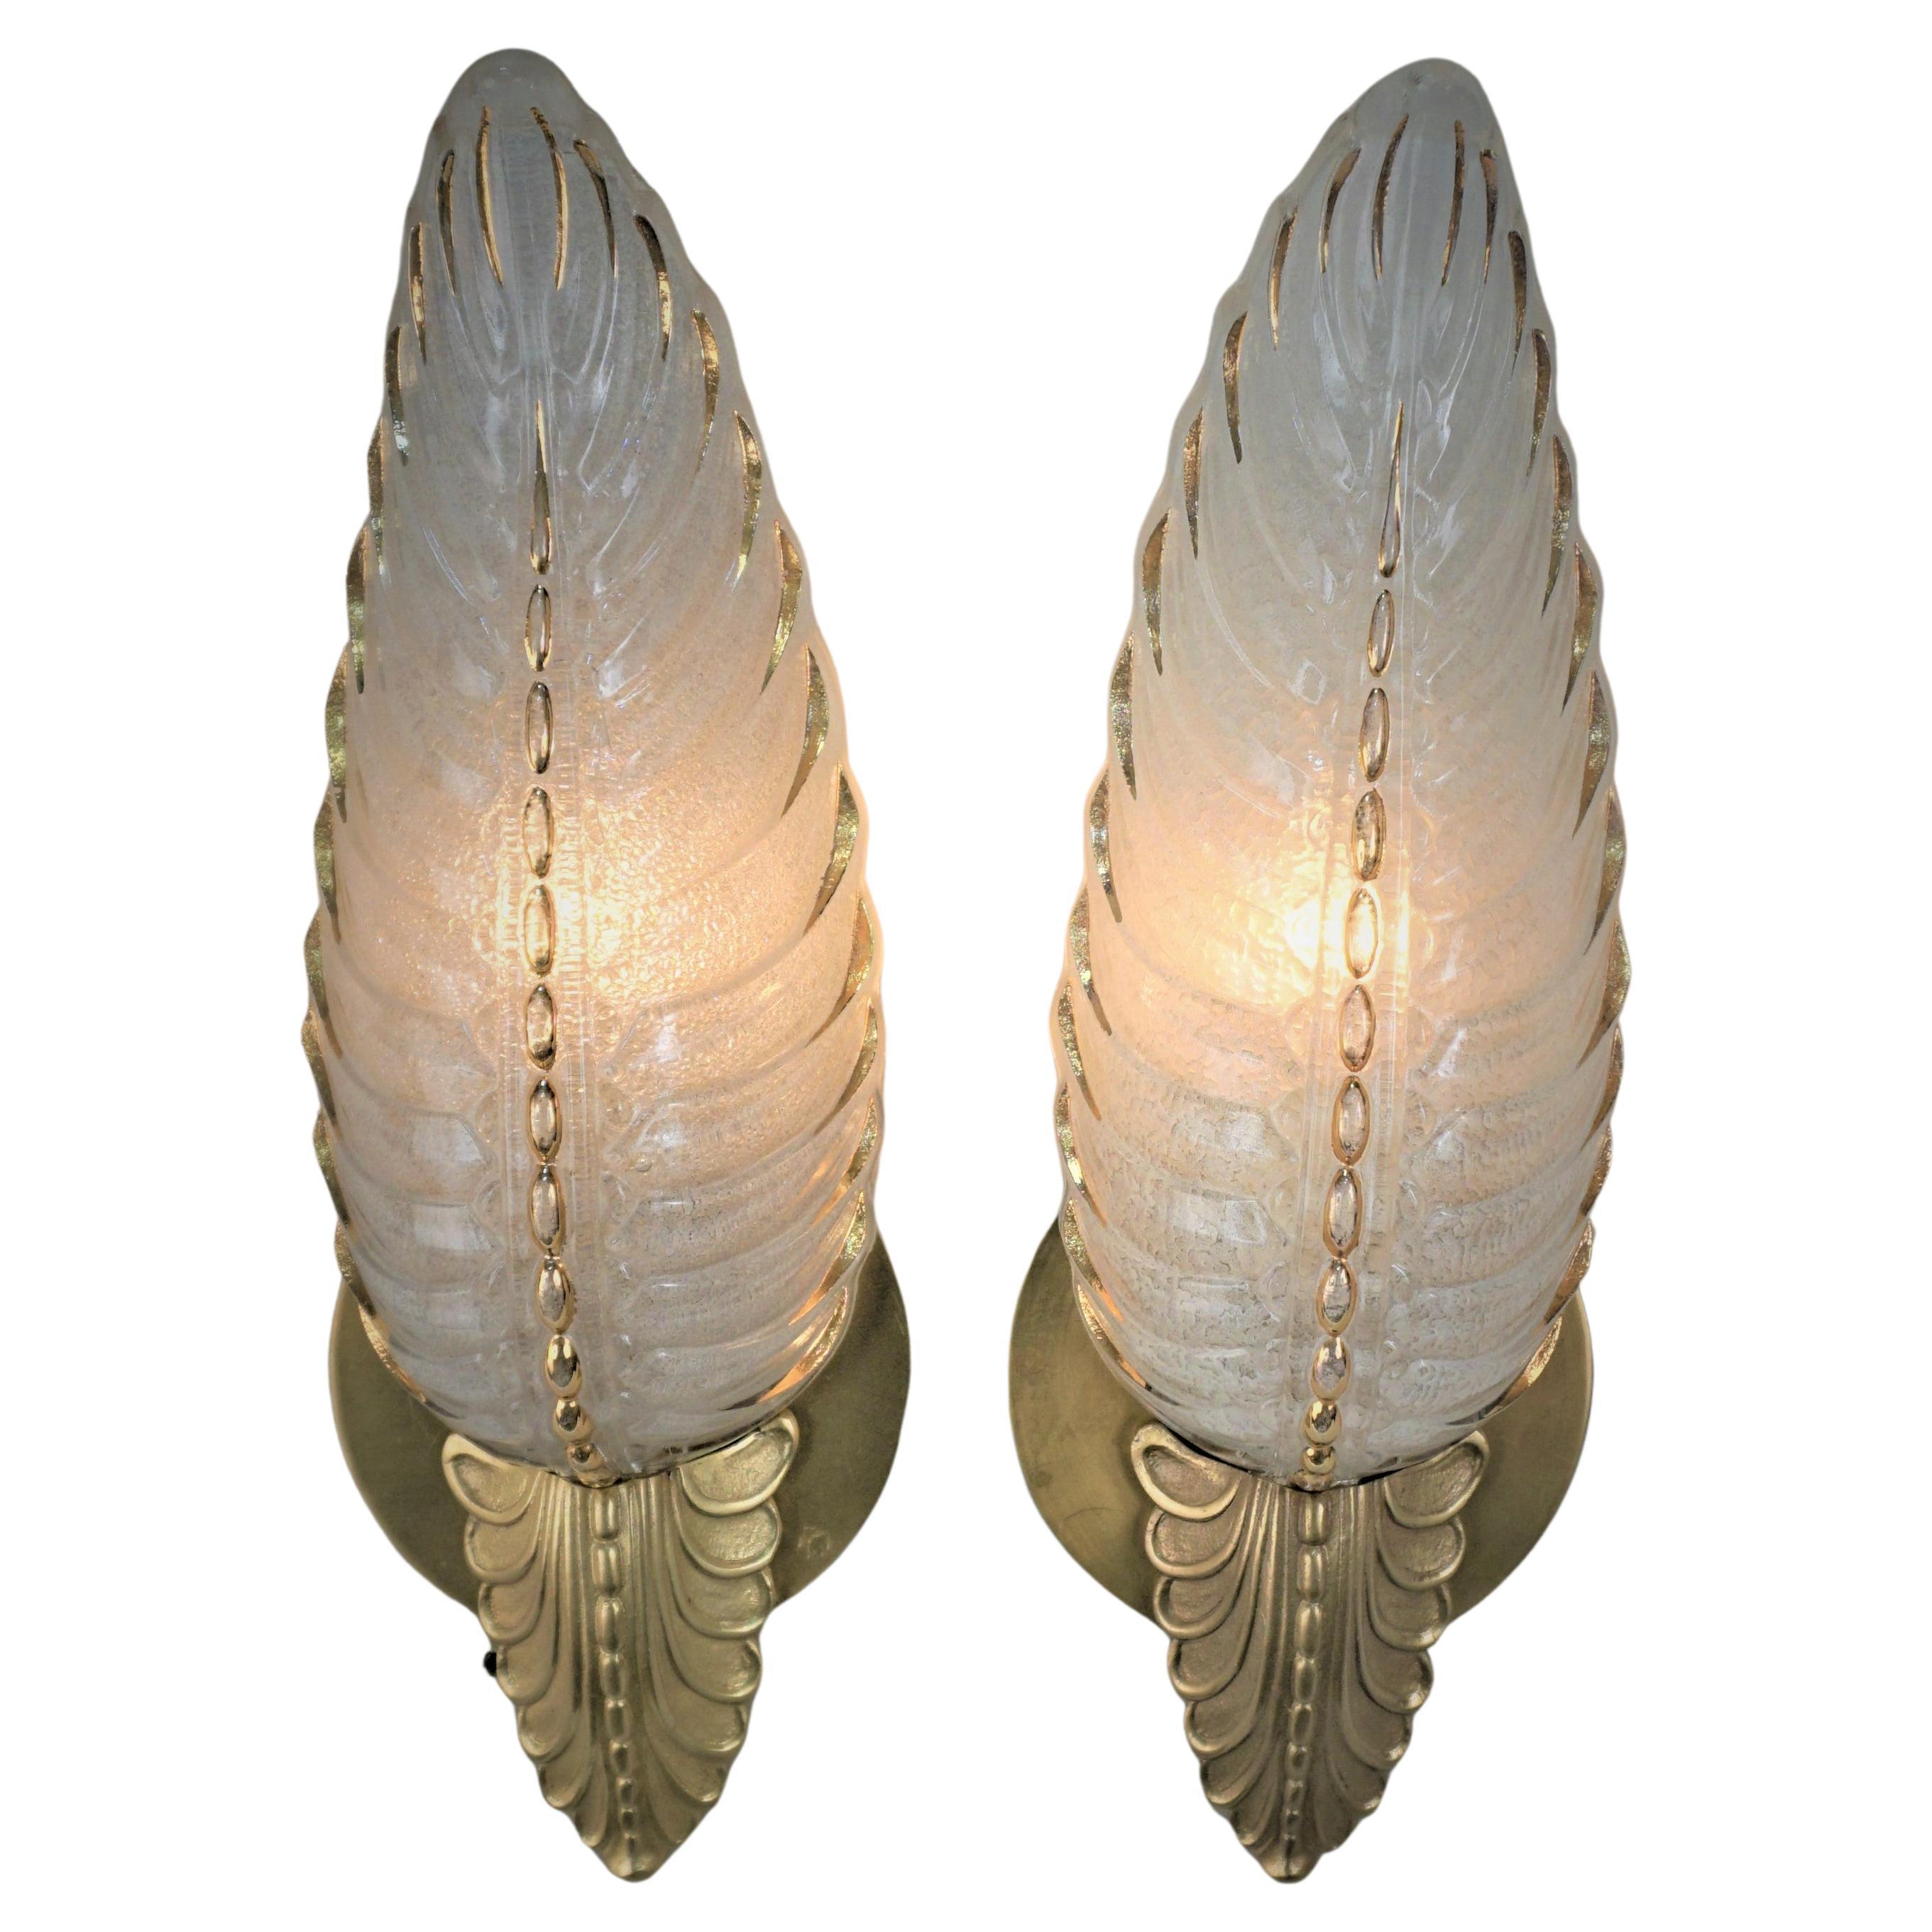  Pair of Art Deco, 1930s, Wall Sconces by Ezan, France